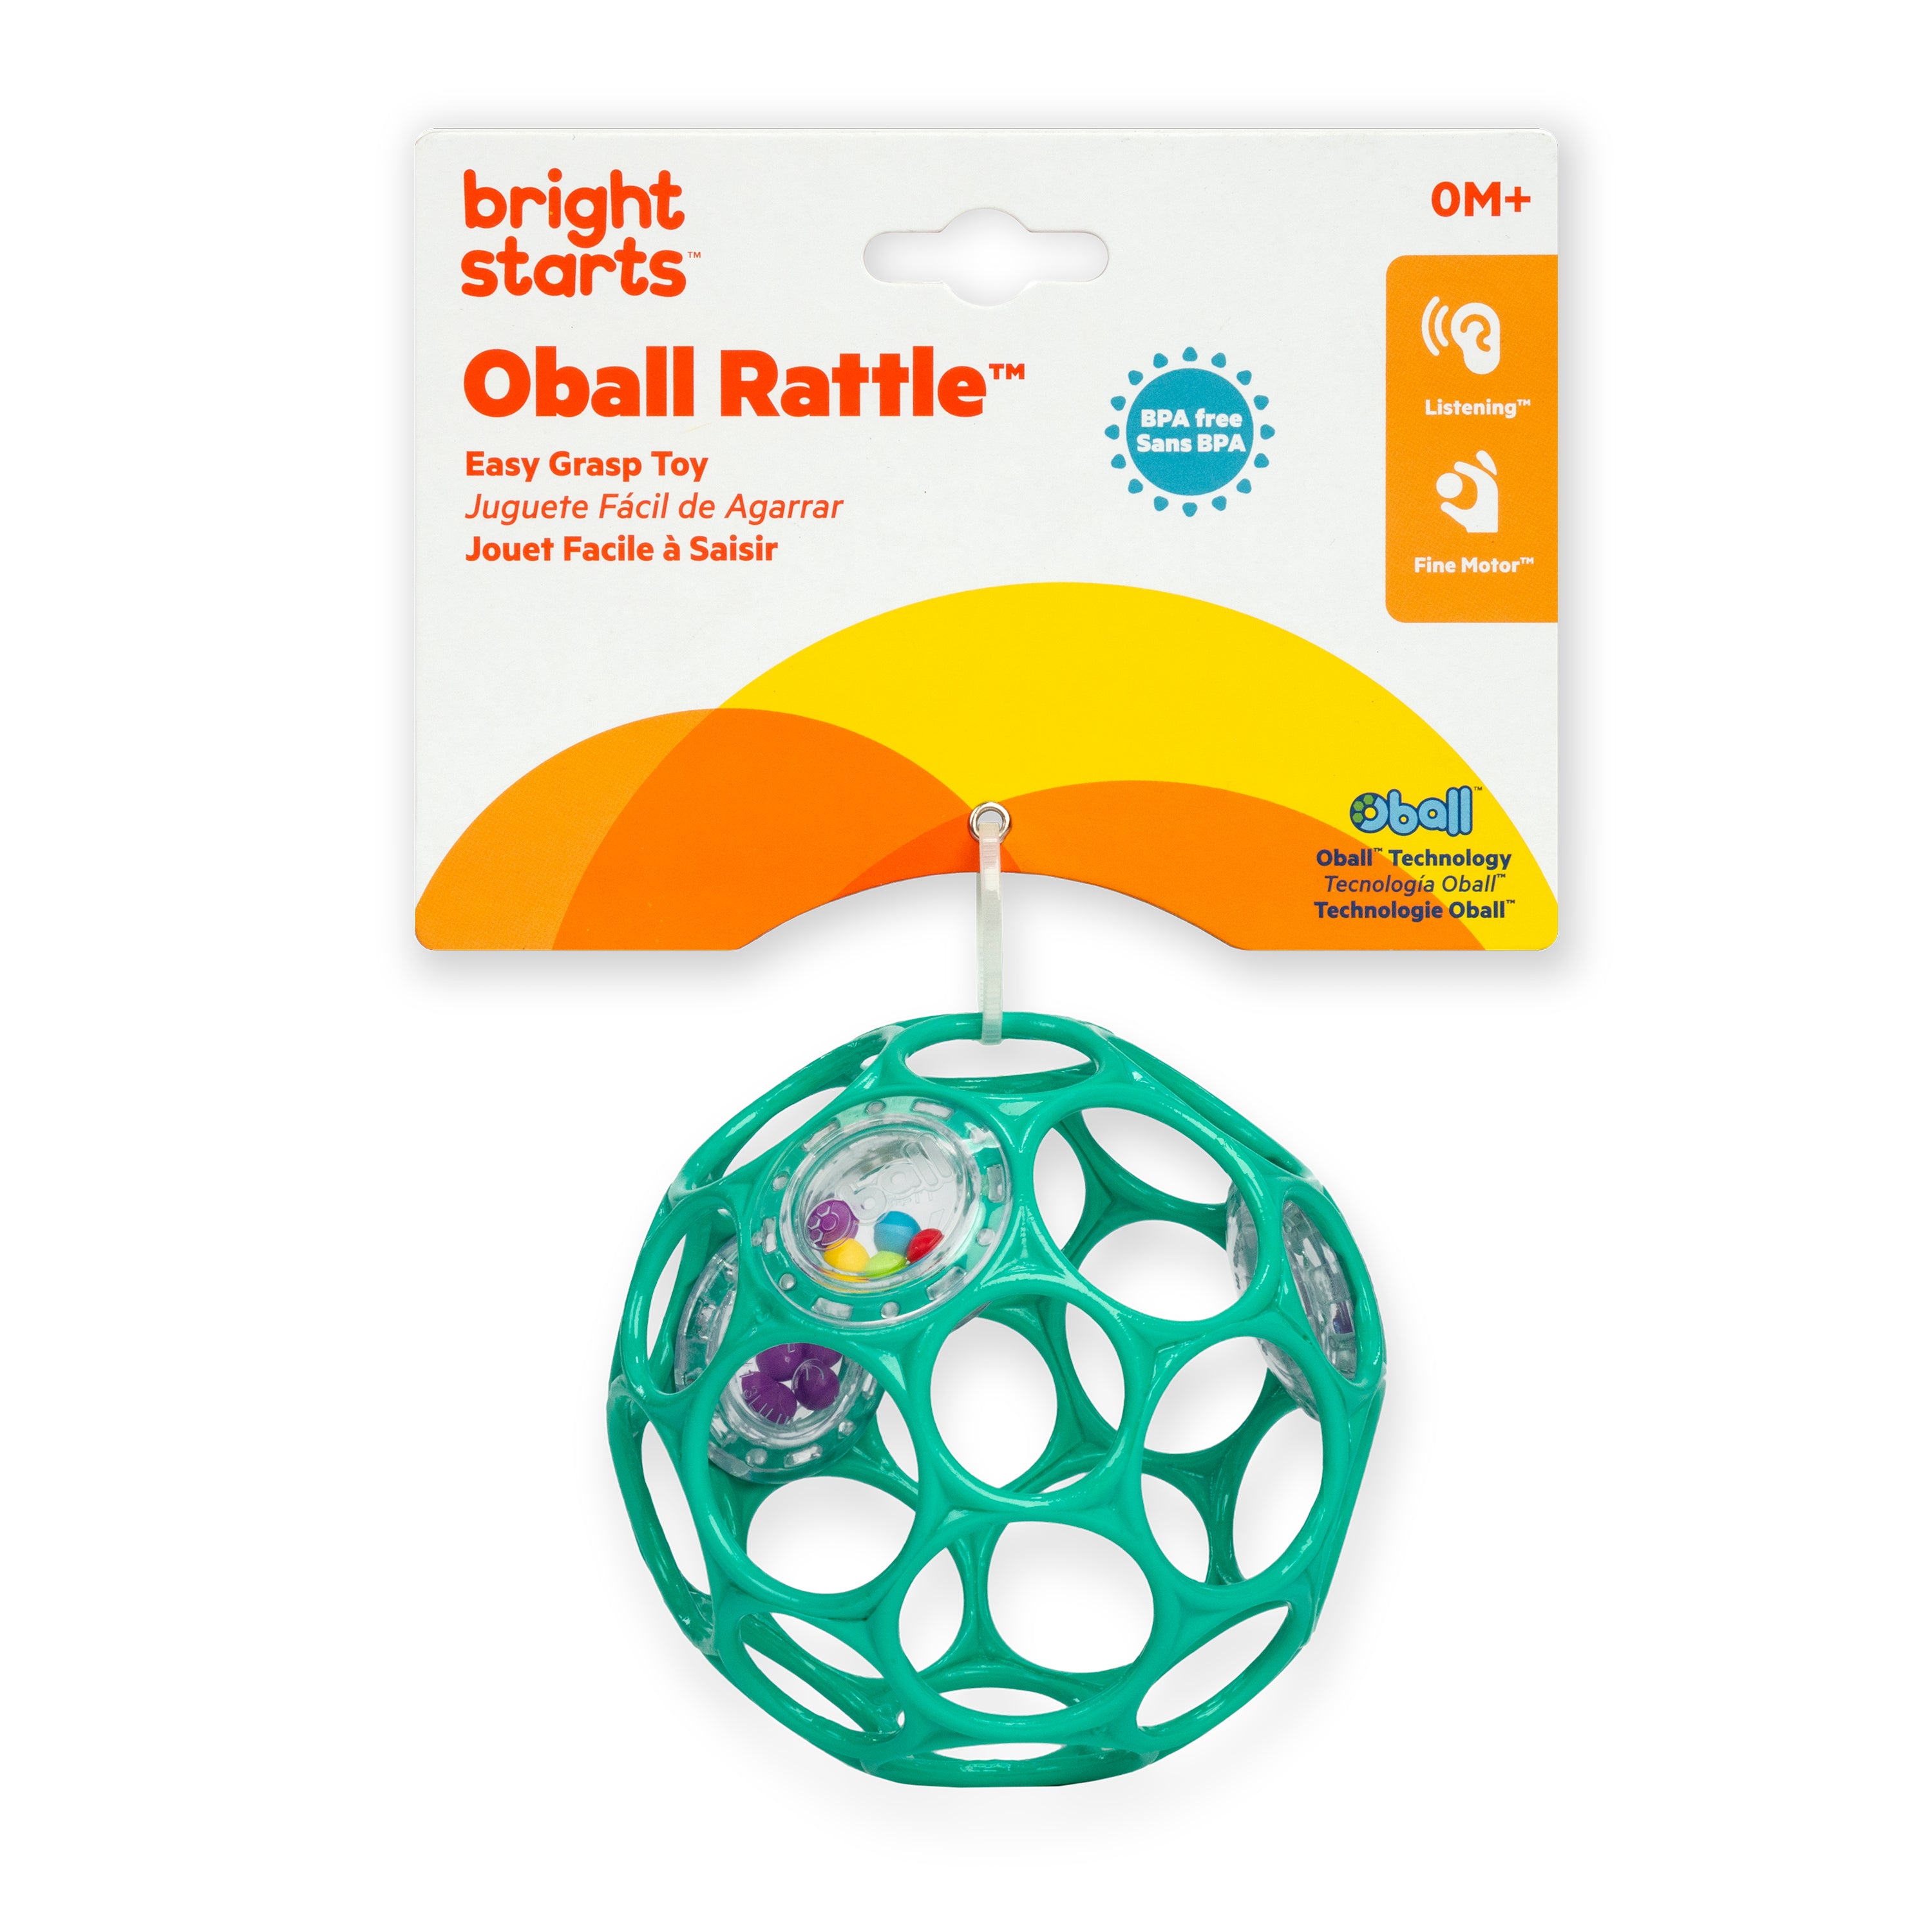 Teal Oball Rattle